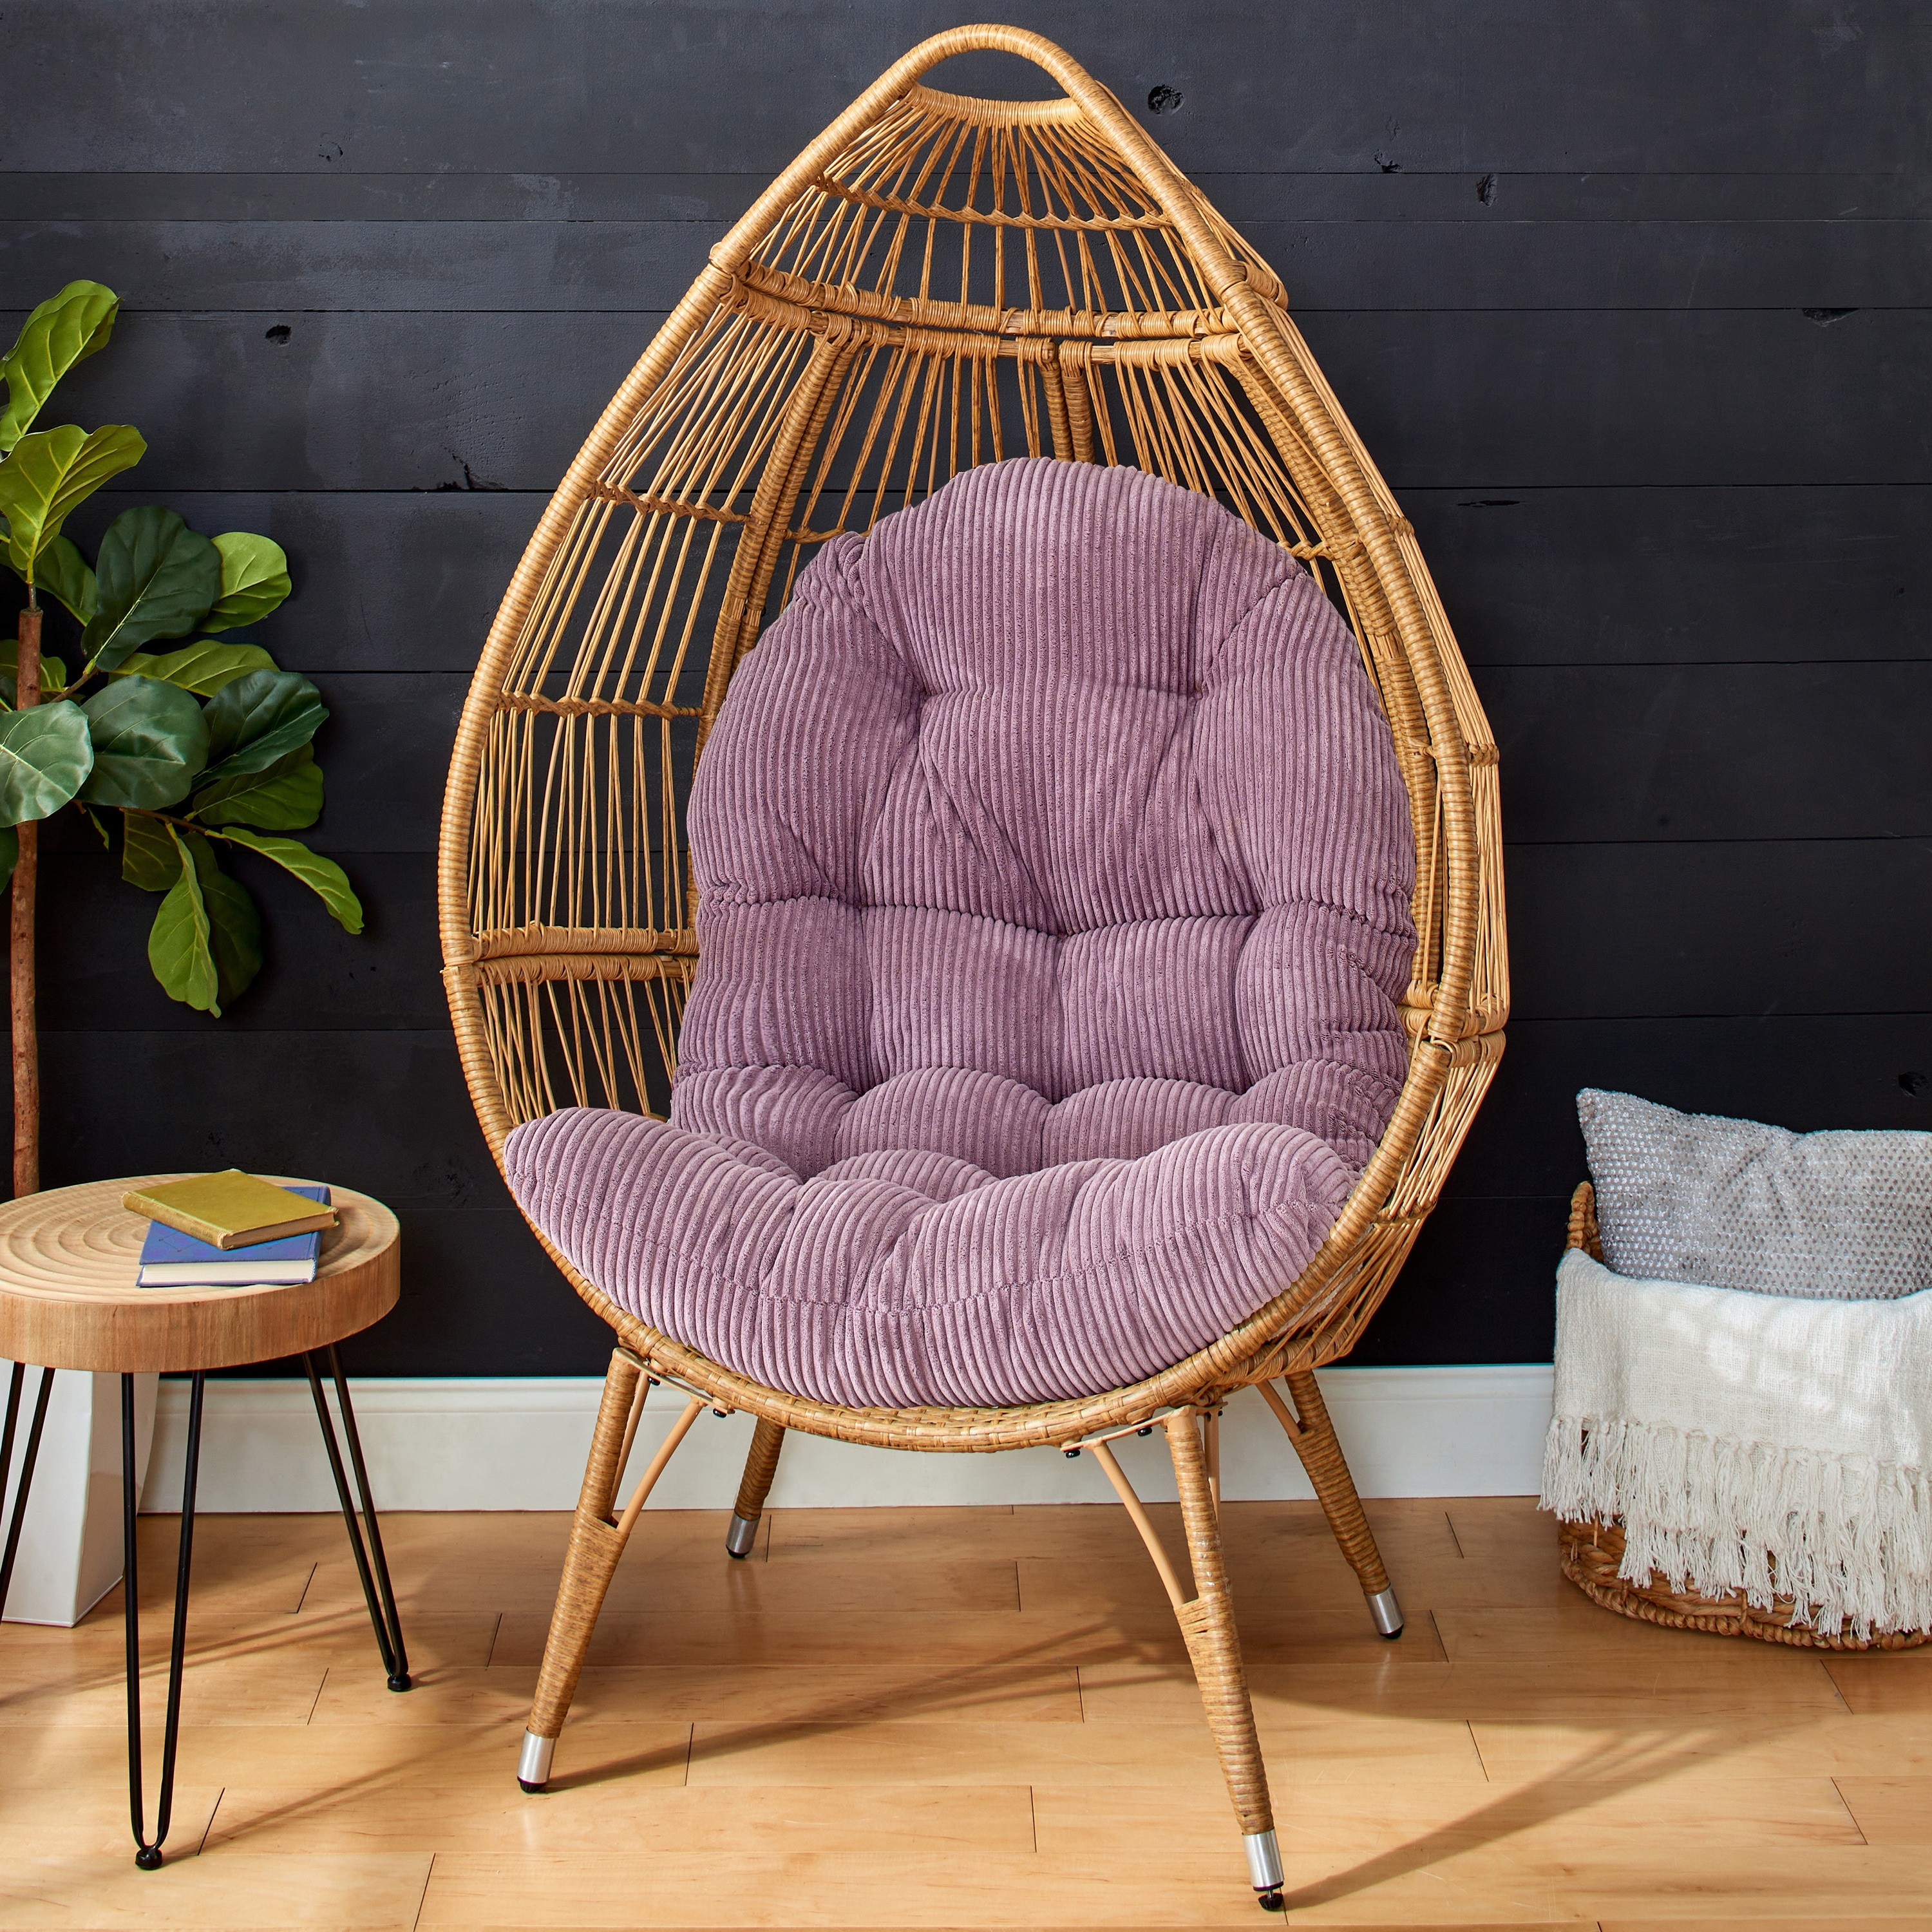 https://ak1.ostkcdn.com/images/products/is/images/direct/bba5a14b2e059652404ef74ce26c9caf1ca29e69/Humble-%2B-Haute-Indoor-Soft-Corduroy-Egg-Chair-Cushion-%28Cushion-Only%29.jpg